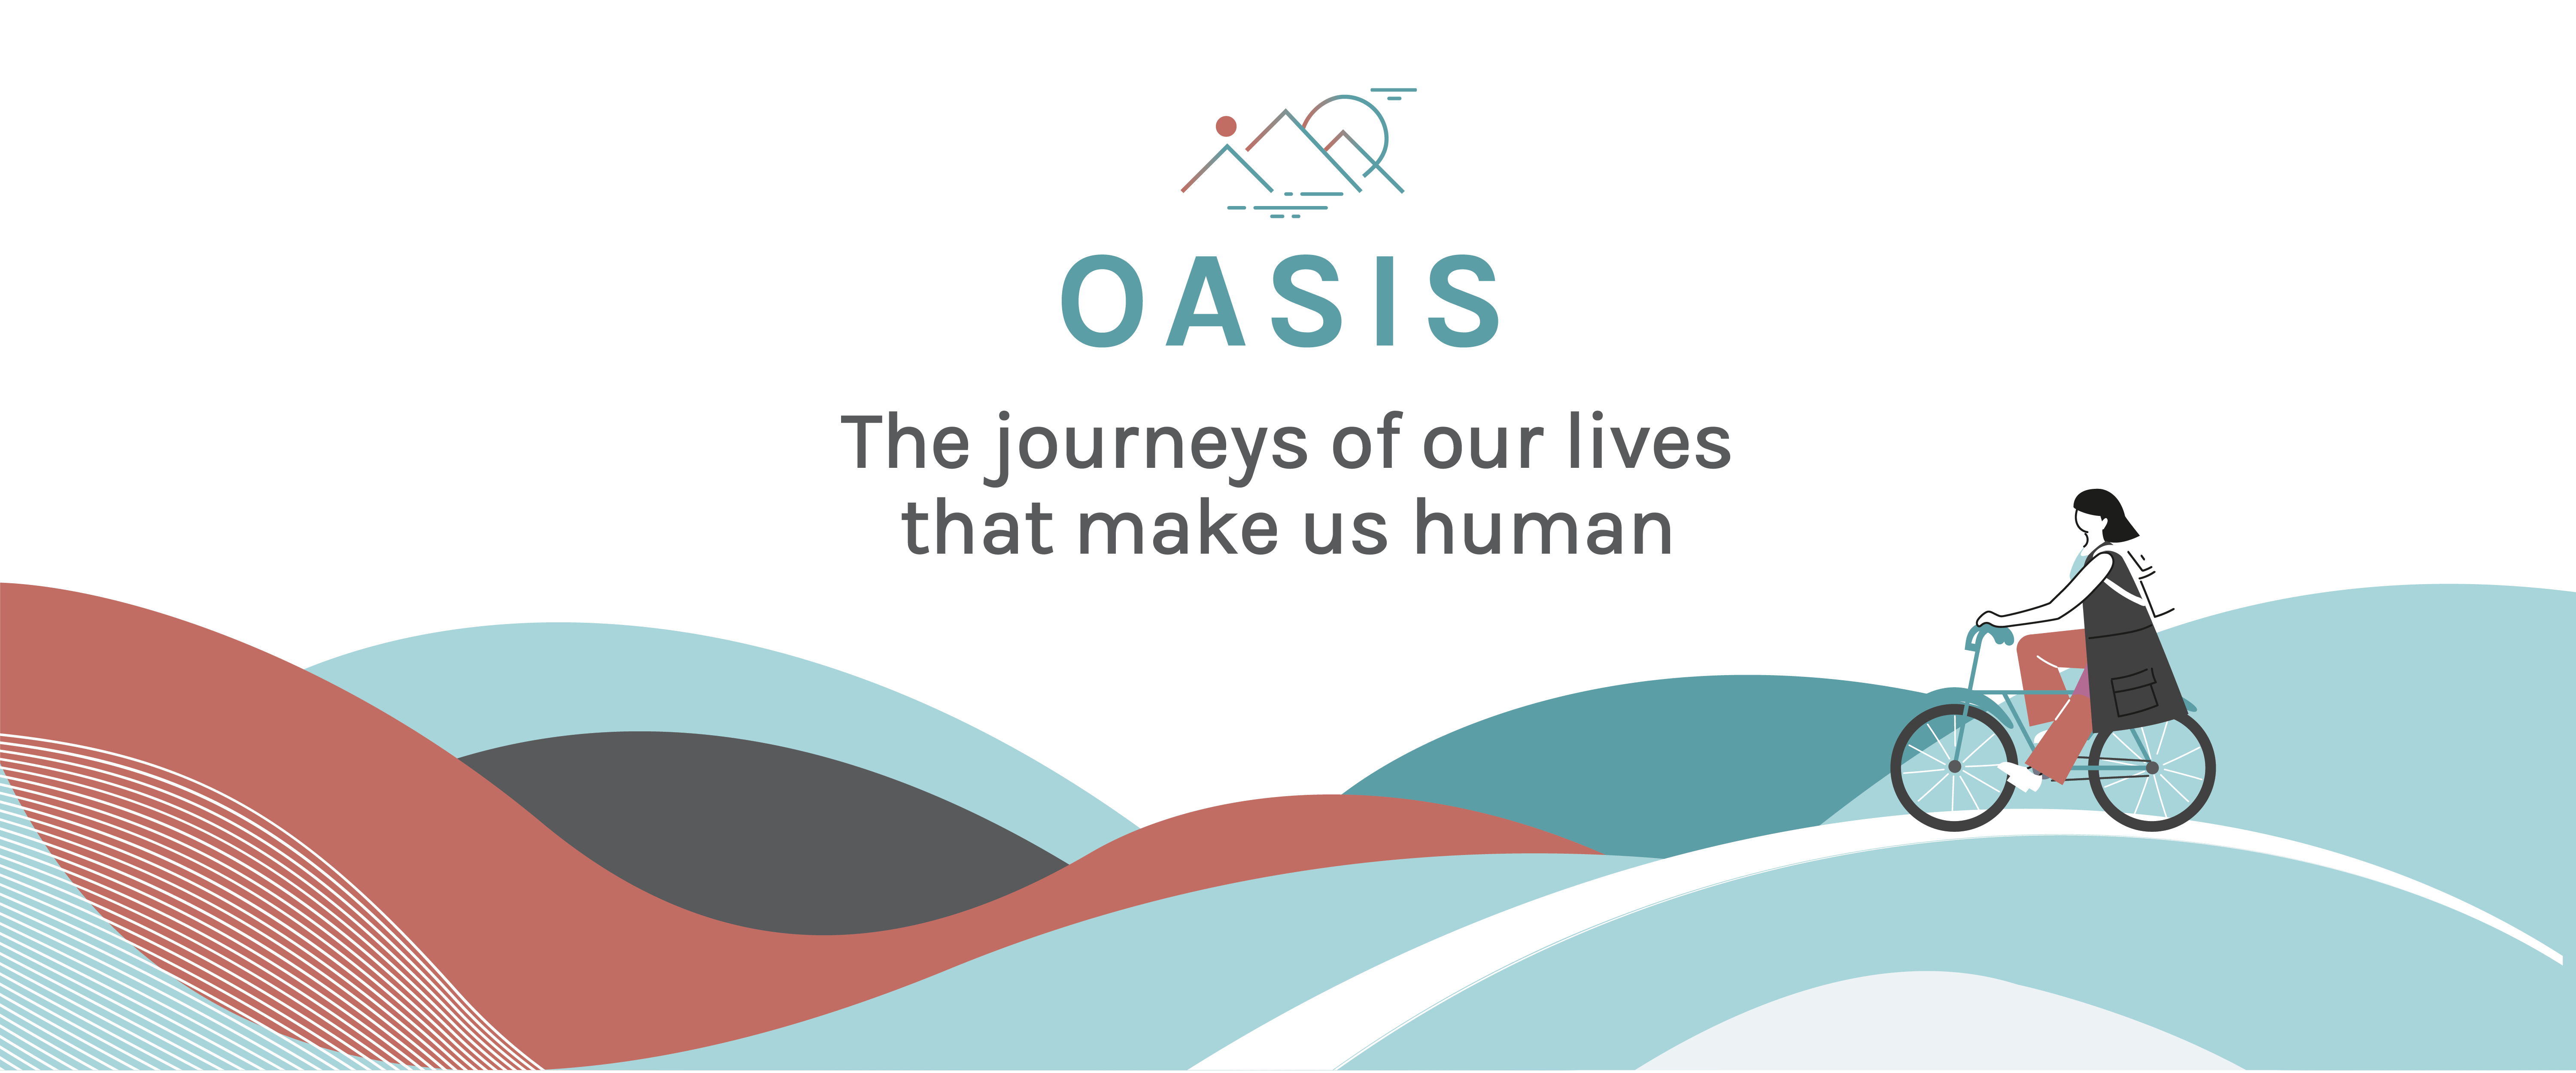 Oasis by KrASIA, the new community platform driven by human experiences